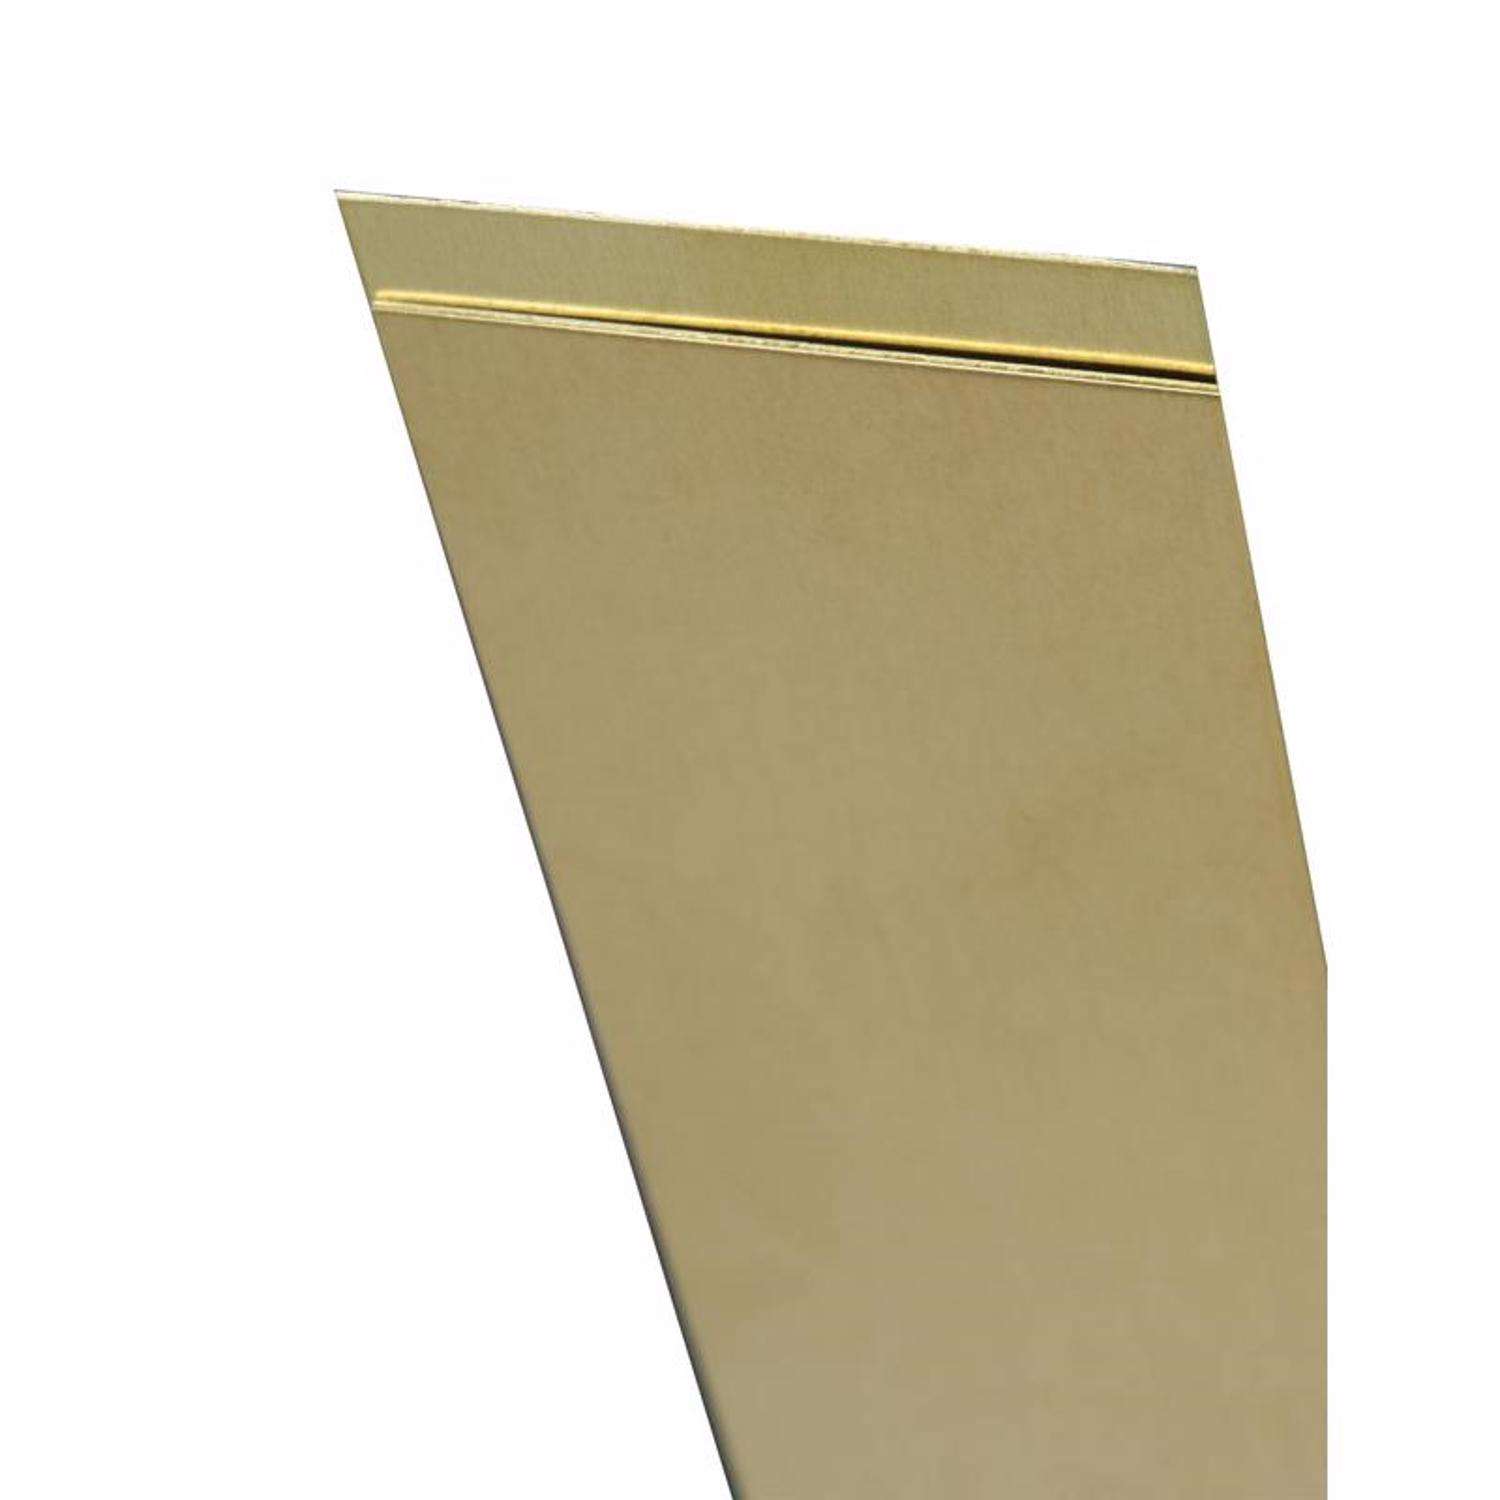  K&S 8235 Brass Strip, 0.025 Thick x 1/4 Wide x 12 Long, 1  Piece, Made in The USA : Industrial & Scientific